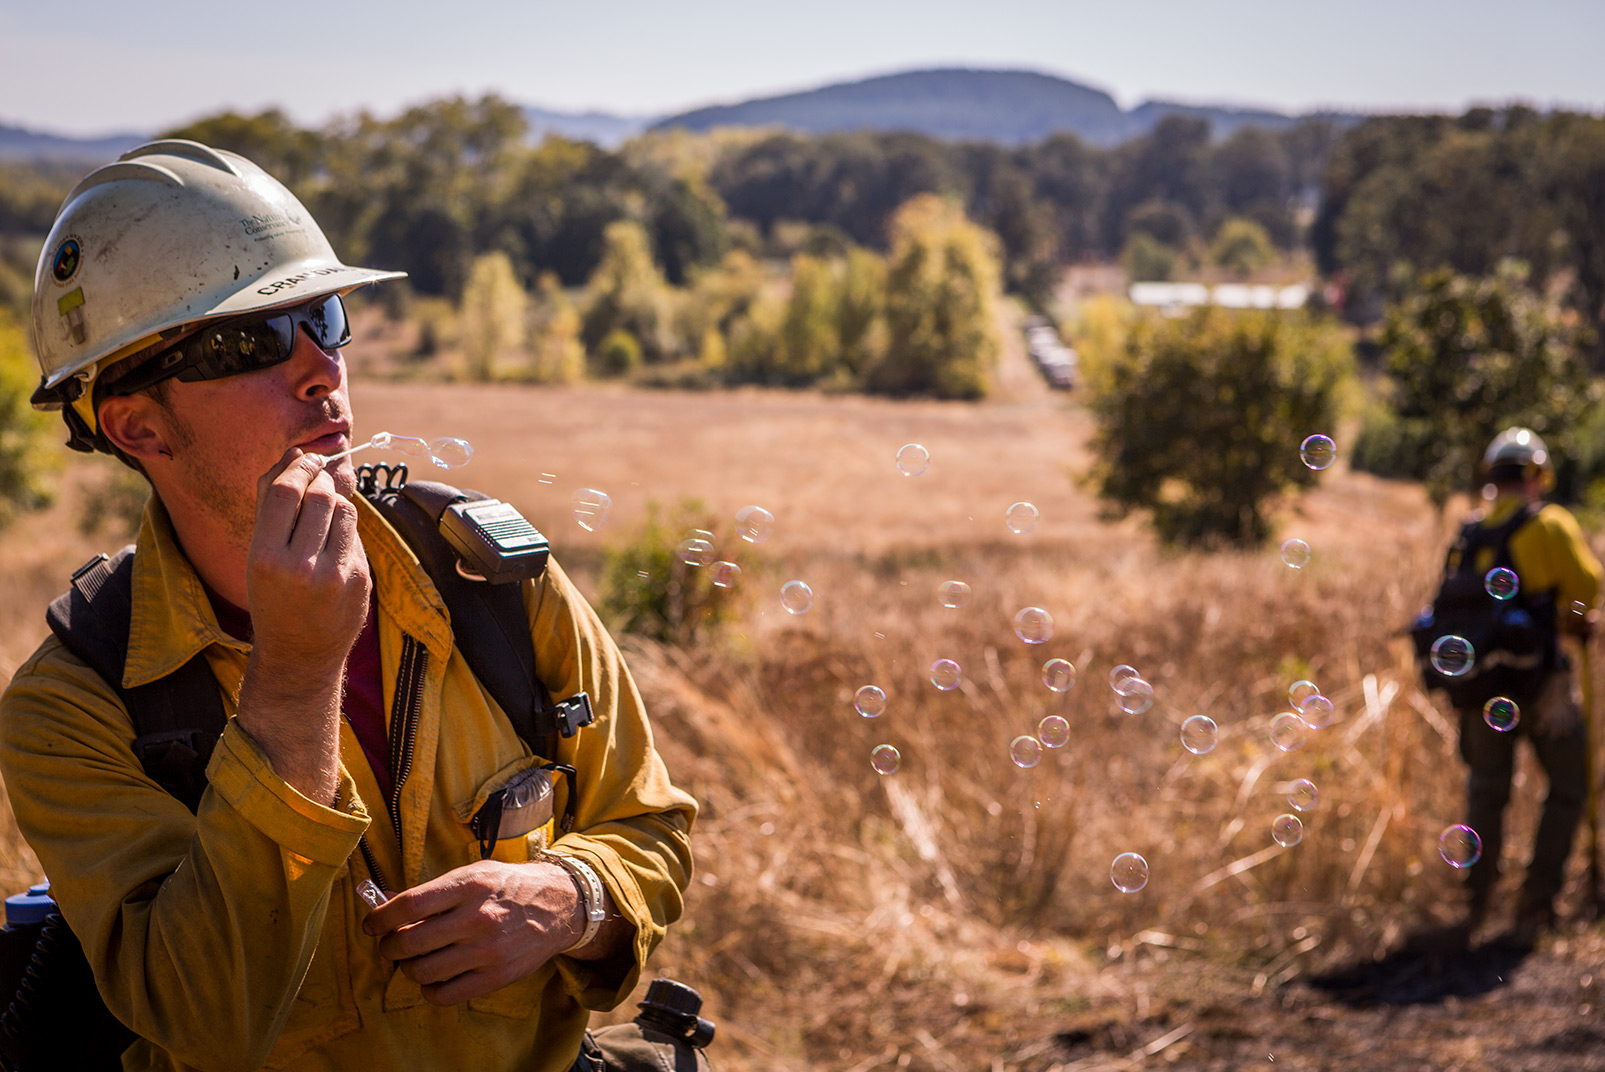 The conditions, including wind speed and direction, must be just right before conducting a burn, Houston says. Here Module Leader Jeff Crandall uses bubbles to gauge wind direction and smoke dispersion. Photo © Jason Houston